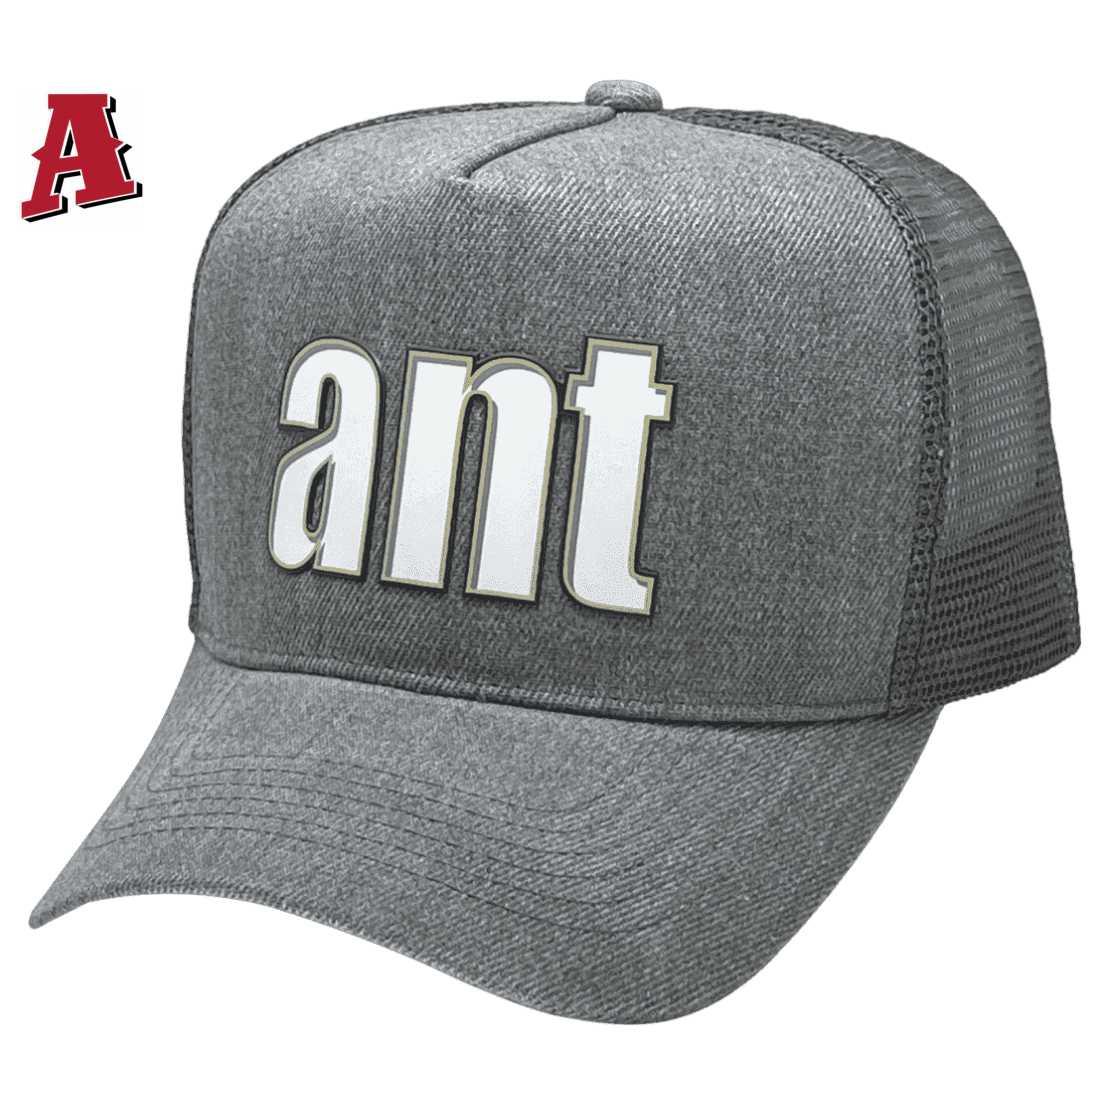 ANT Galactic Pty Ltd Alice Springs NT HP Basic Aussie Trucker Hats with Australian Head Fit Crown and 2 SideBands